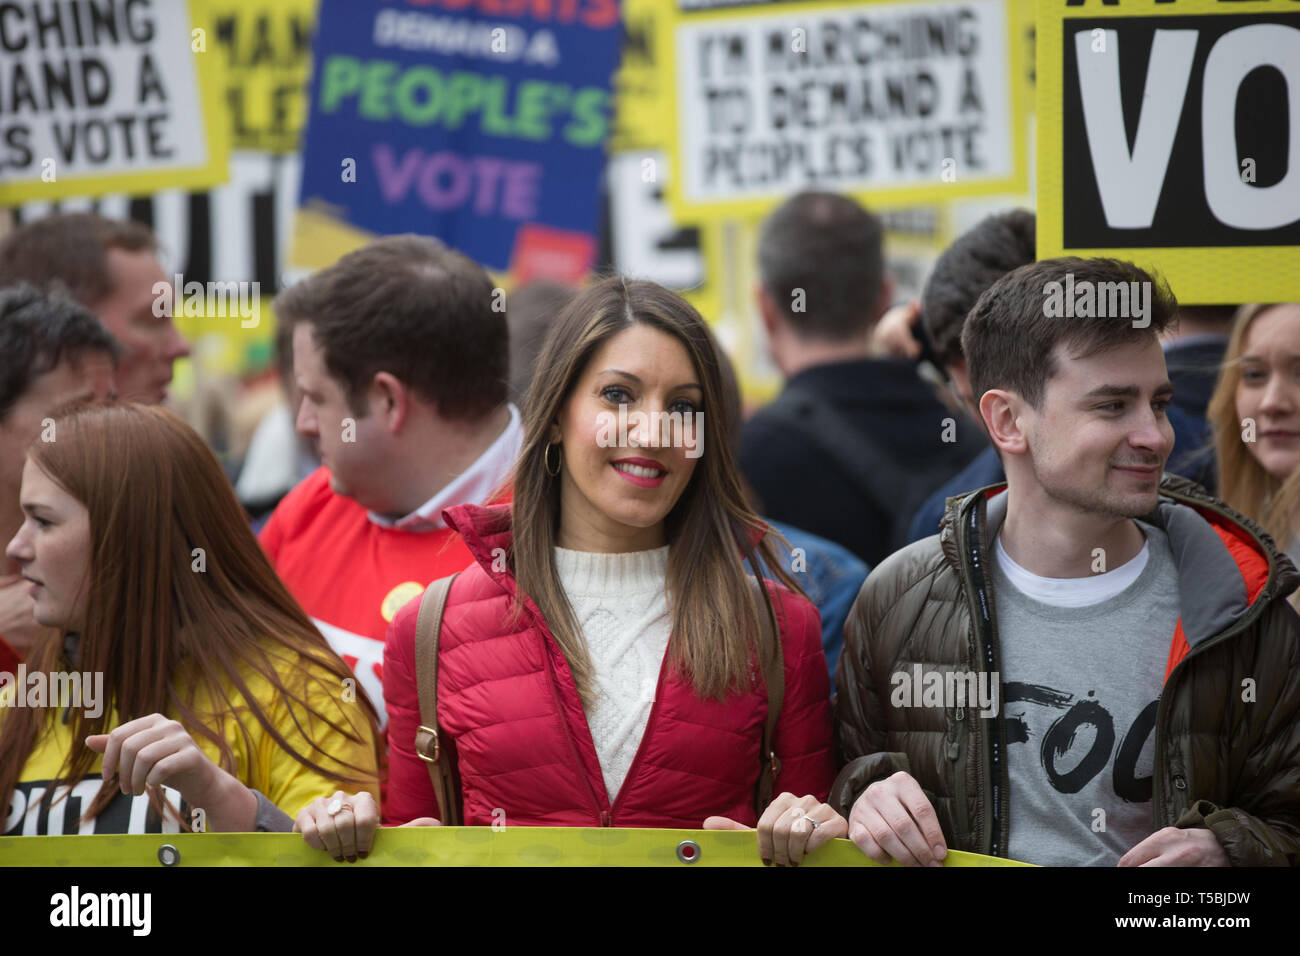 Put It To The People march sees hundreds of thousands of people march through London demanding a final say on Brexit  Featuring: Atmosphere, View Where: London, United Kingdom When: 23 Mar 2019 Credit: Wheatley/WENN Stock Photo